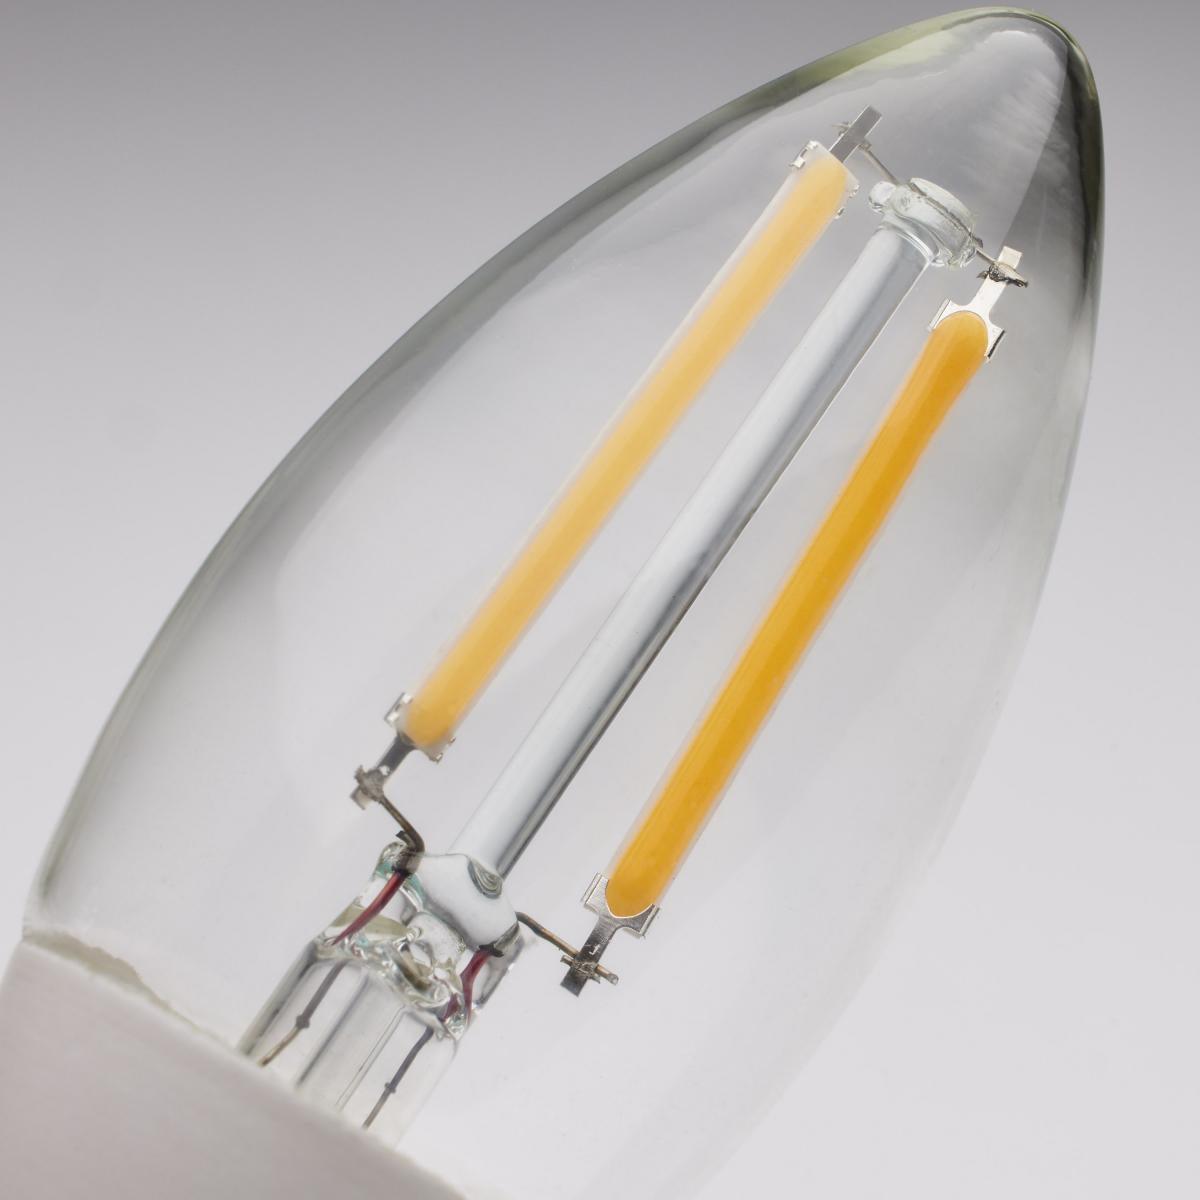 B11 Candle Filament LED Bulb, 40W Equivalent,5 Watt, 500 Lumens, 2700K, E12 Candelabra Base, Clear Finish, With Photocell - Bees Lighting